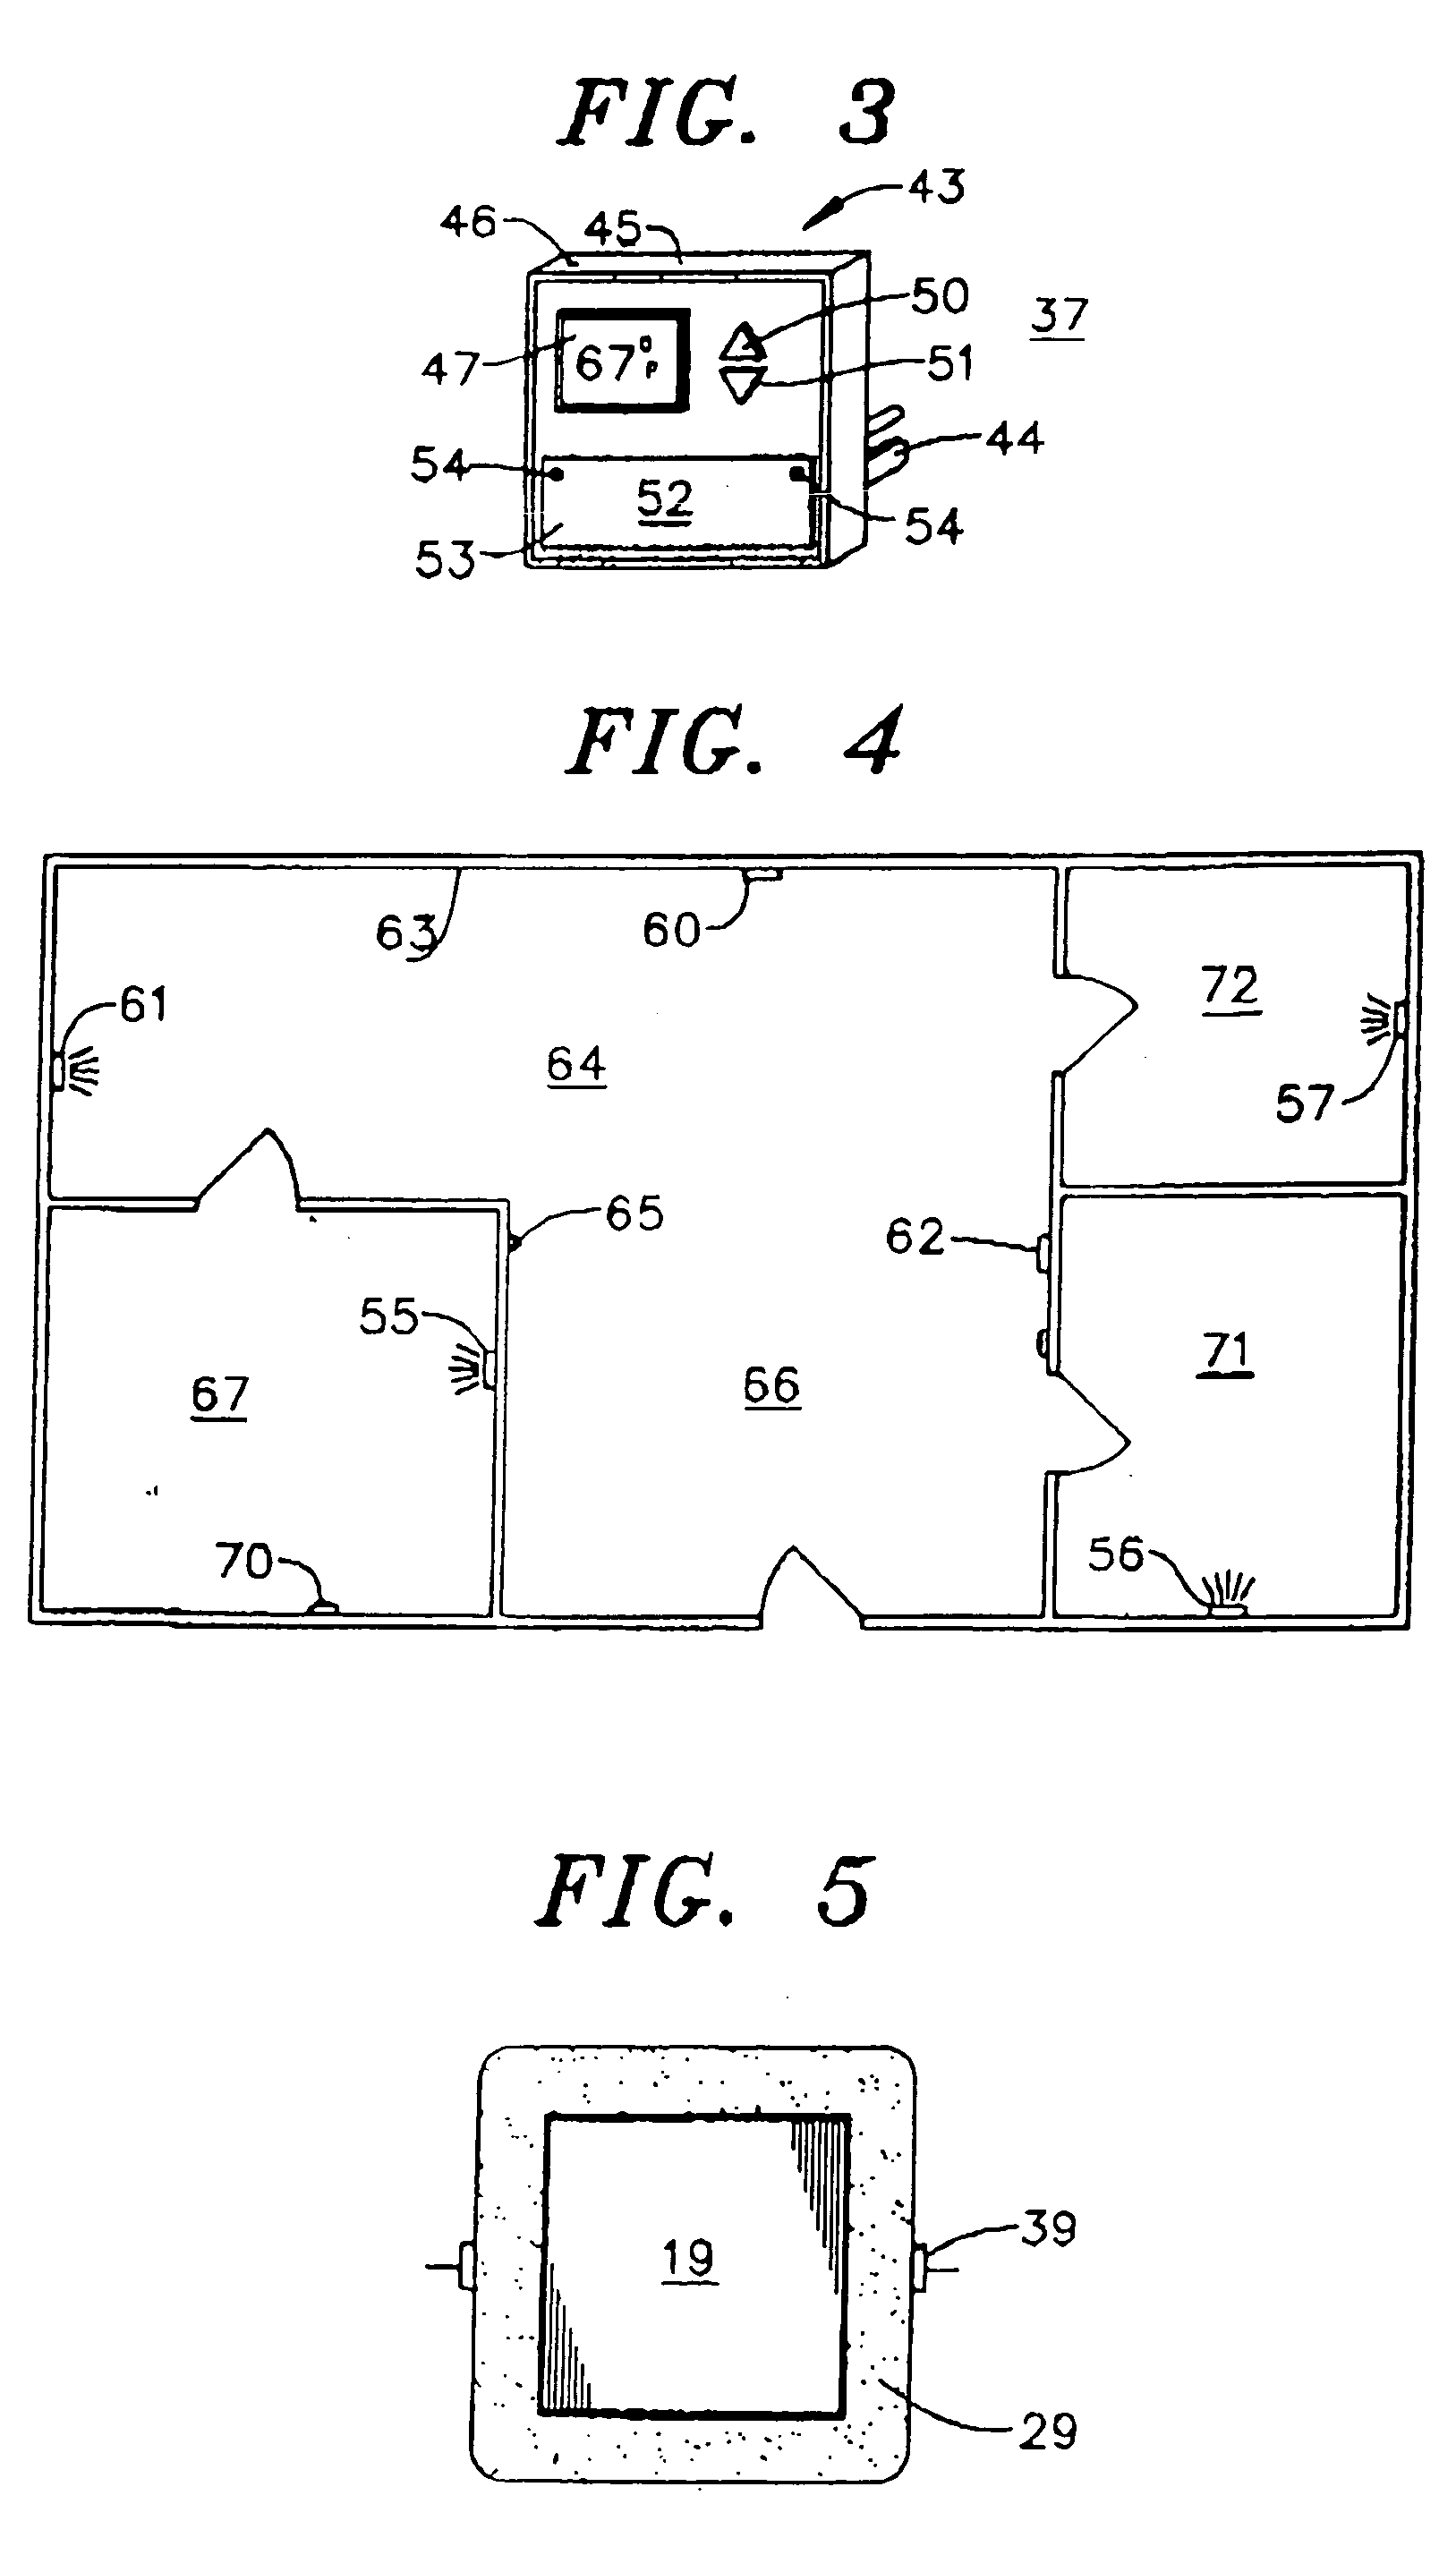 Electromagnetic frequency-controlled zoning and dampering system